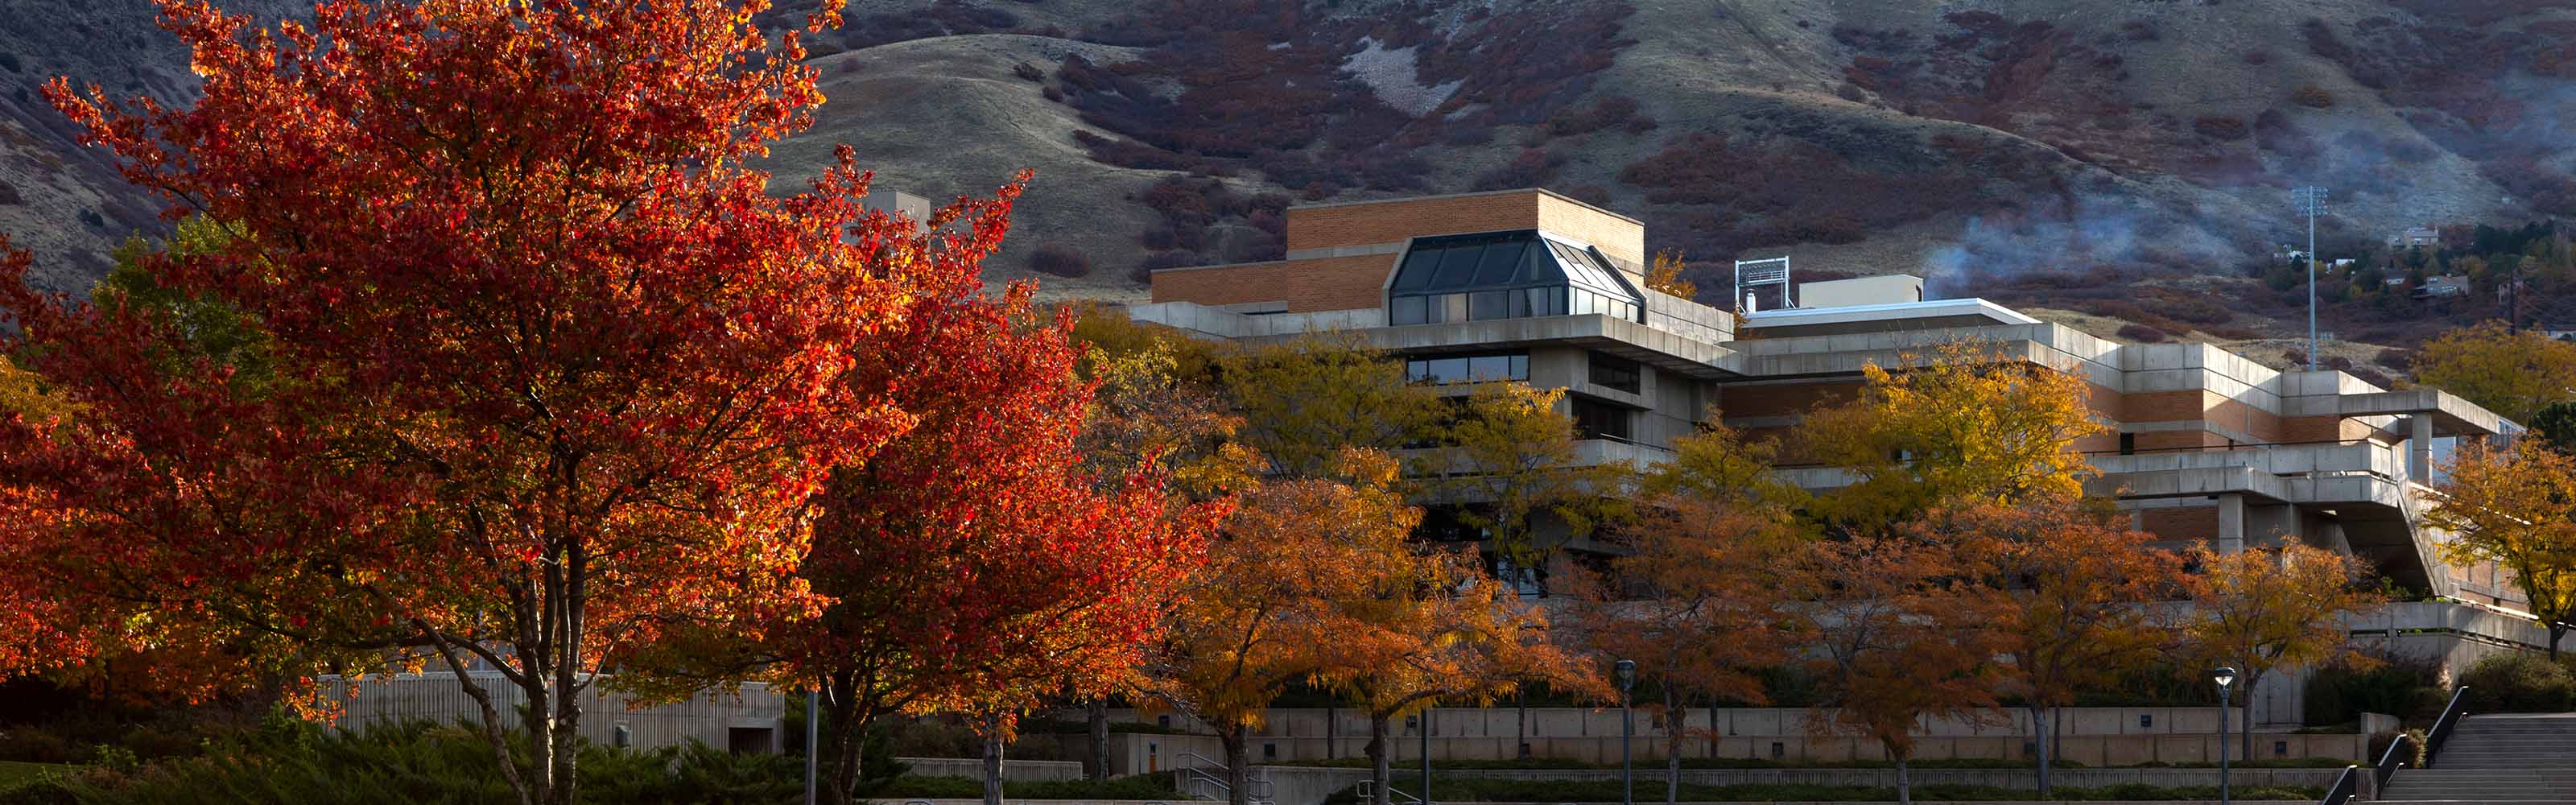 Weber State University Campus during the fall